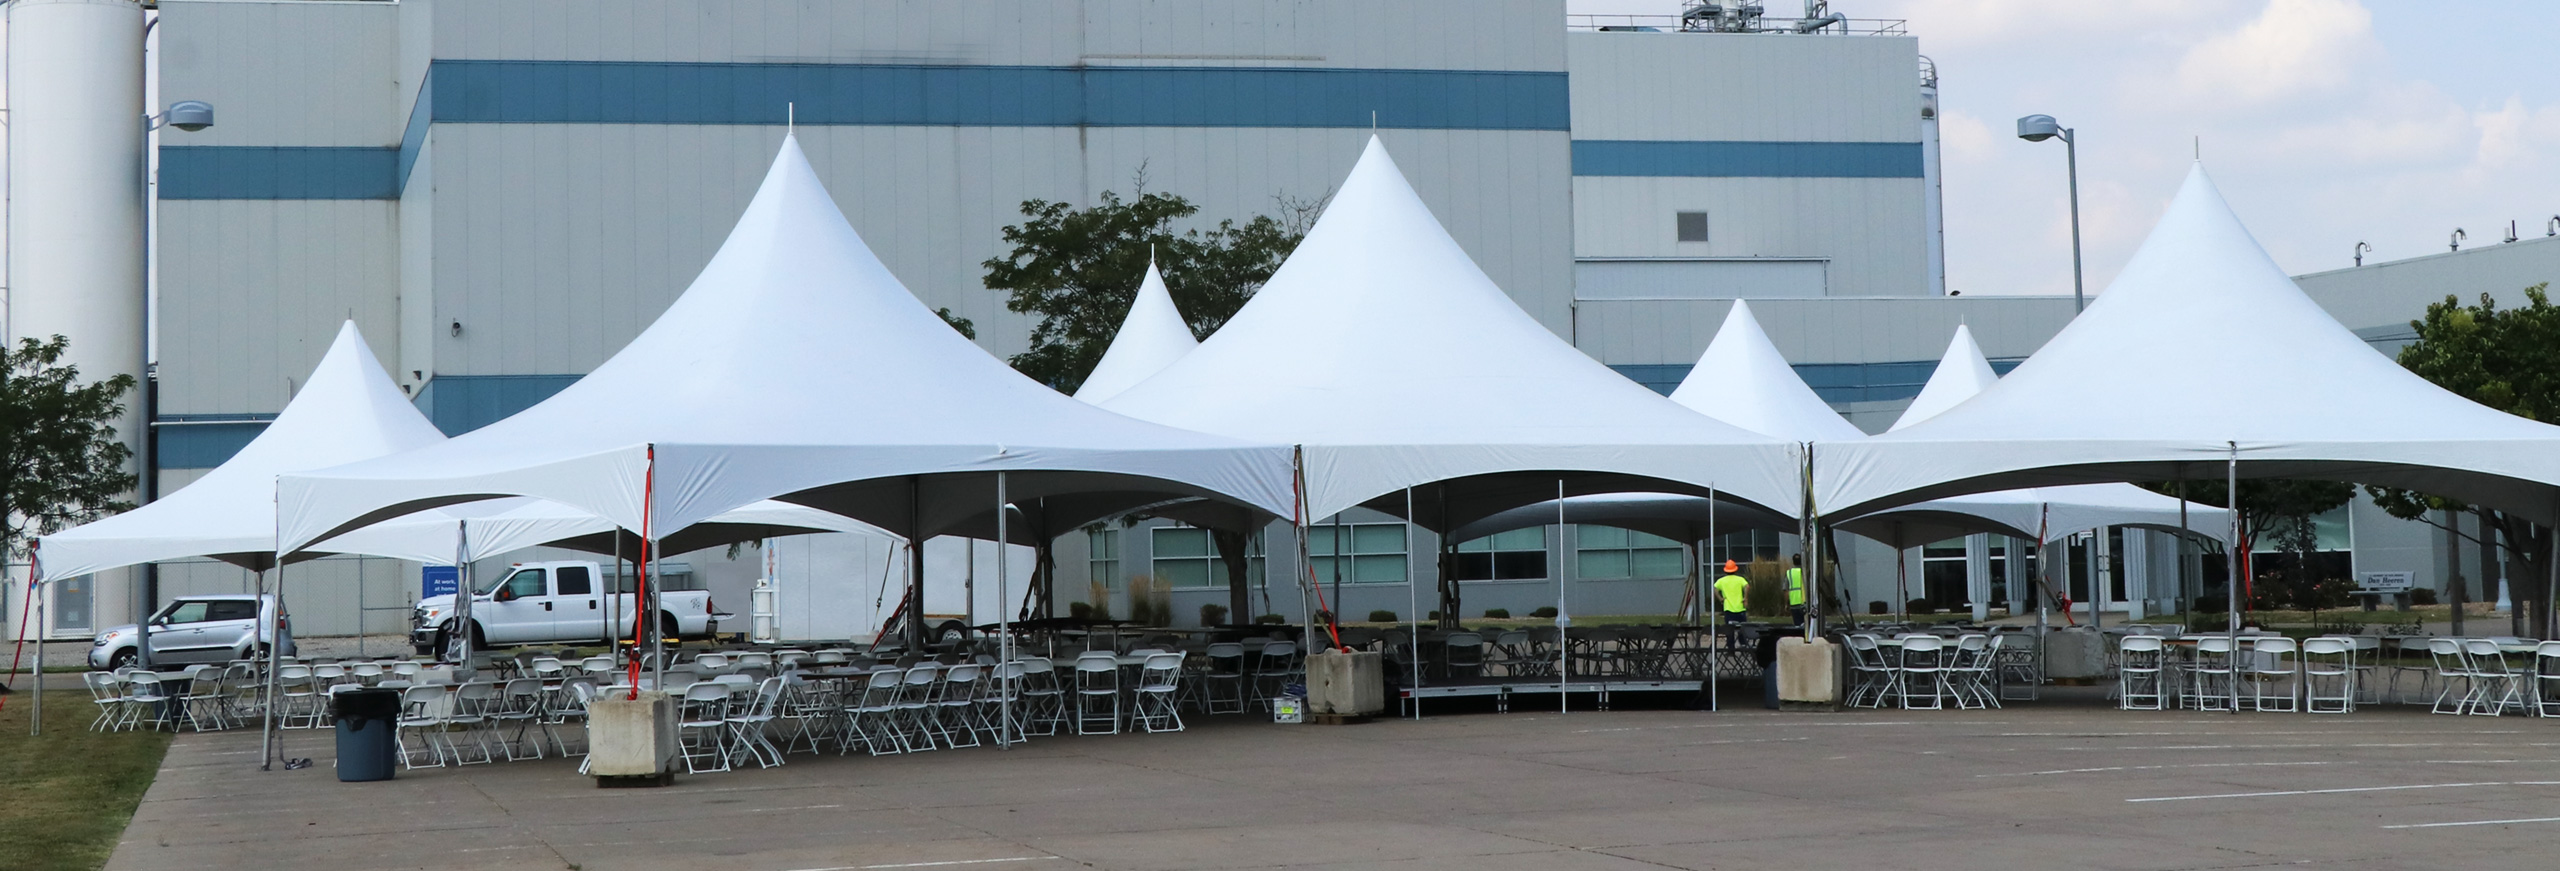 corporate tents for events